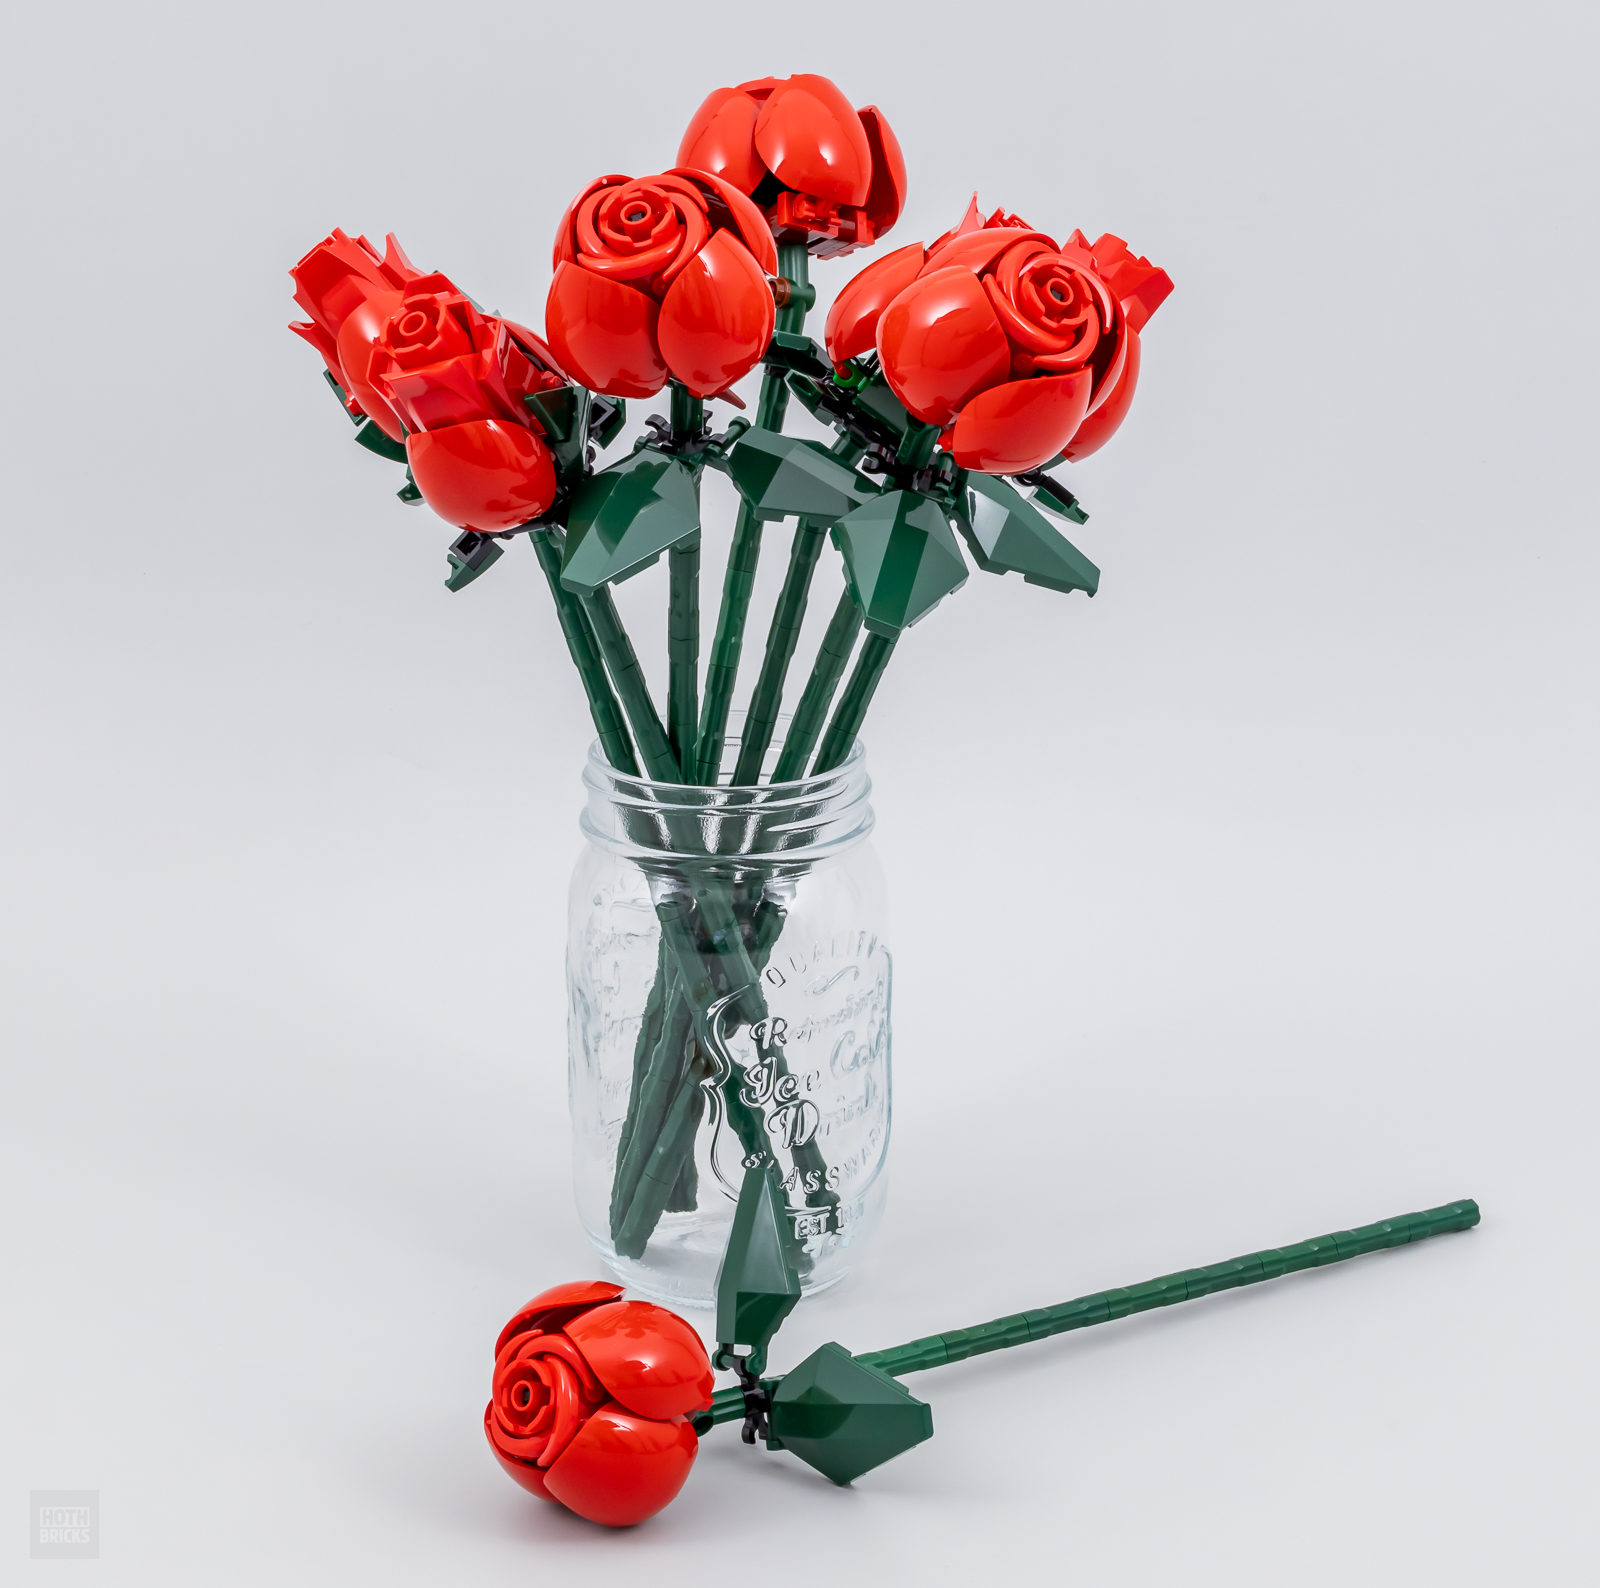 The perfect gift for you S/O! LEGO Icons Bouquet of Roses coming Jan 1